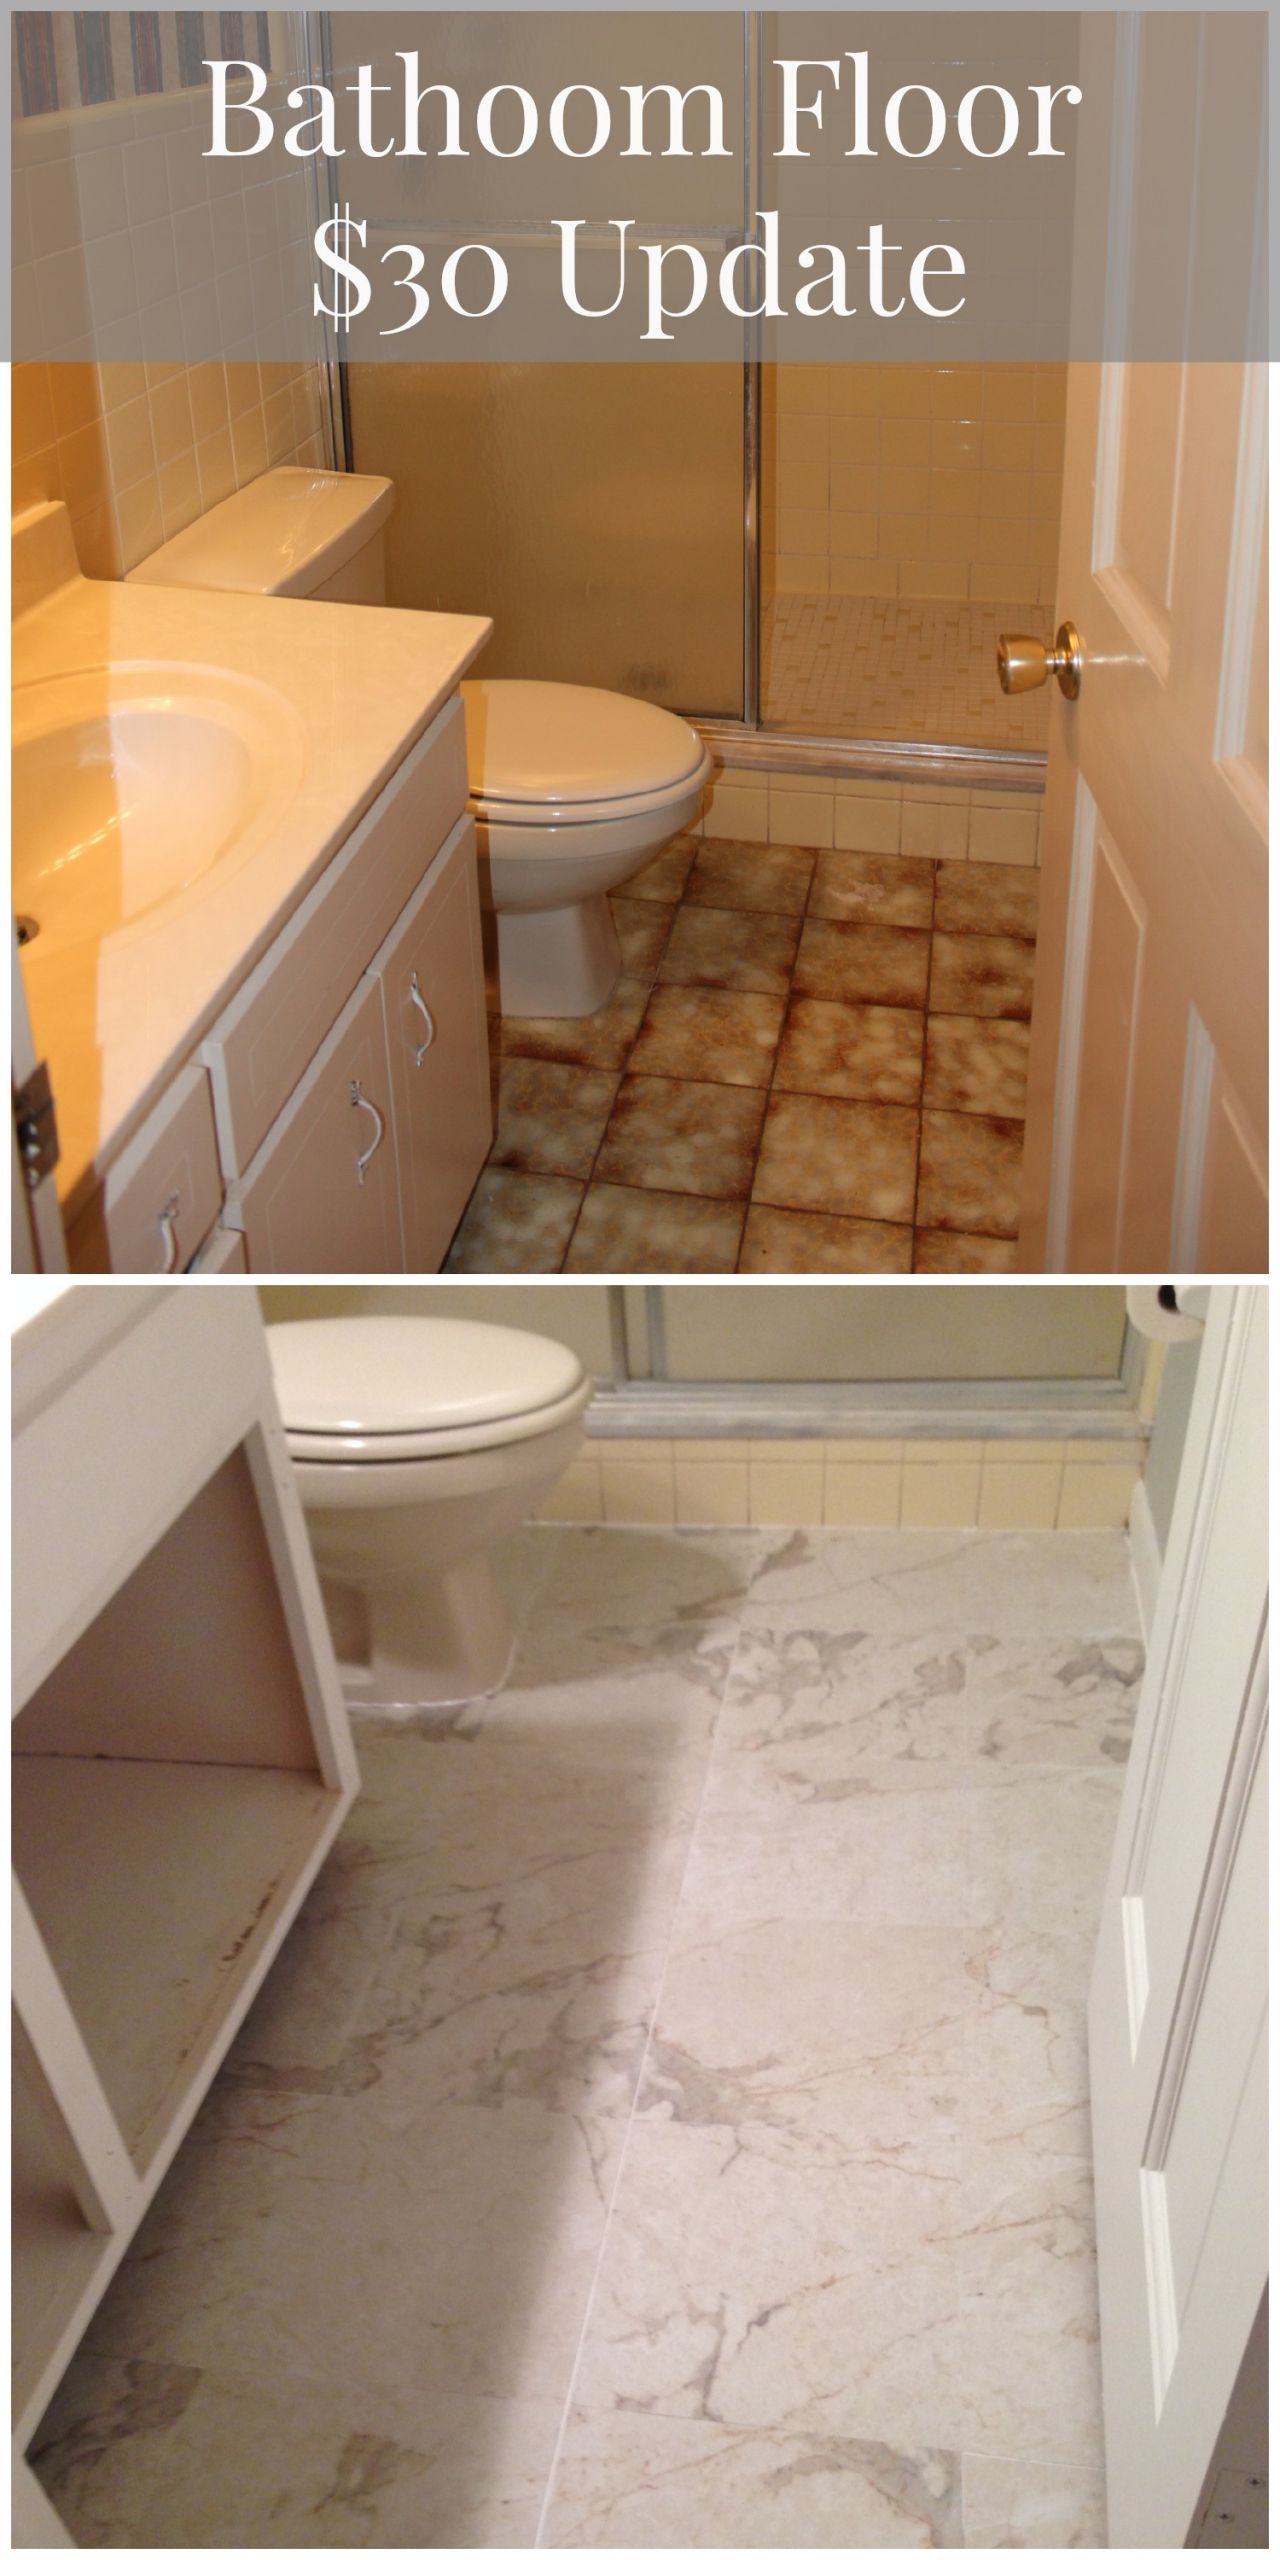 Update Bathroom Tile Without Replacing
 DIY Home Renovation The Happy Housewife™ Home Management